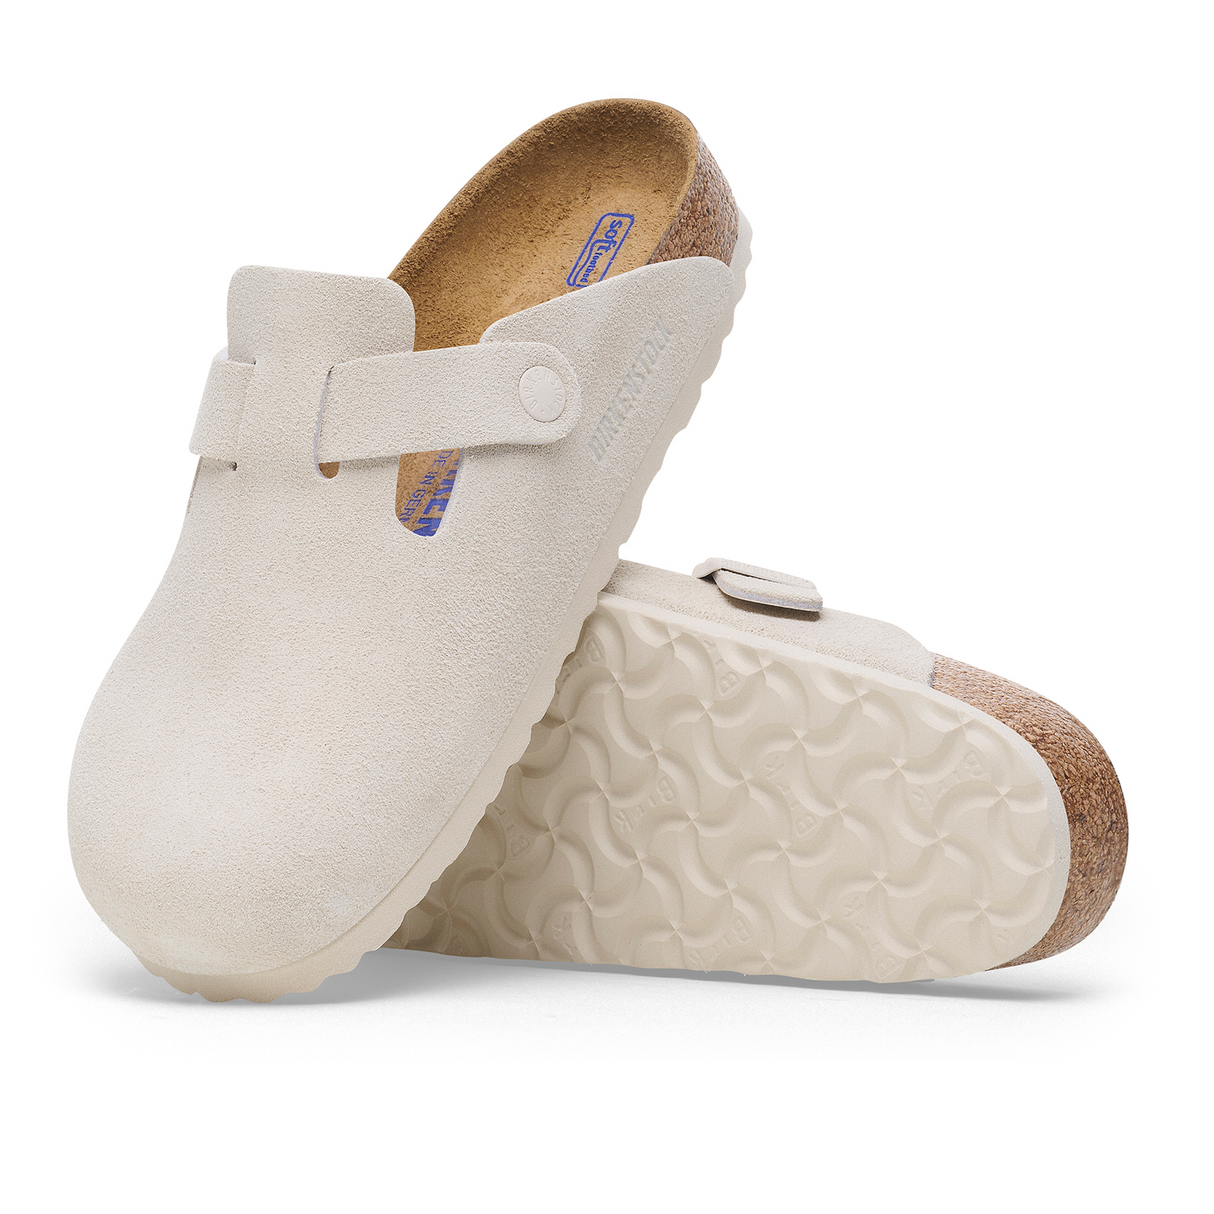 Birkenstock Boston Soft Footbed Narrow Clog (Women) - Antique White Suede Dress-Casual - Clogs & Mules - The Heel Shoe Fitters